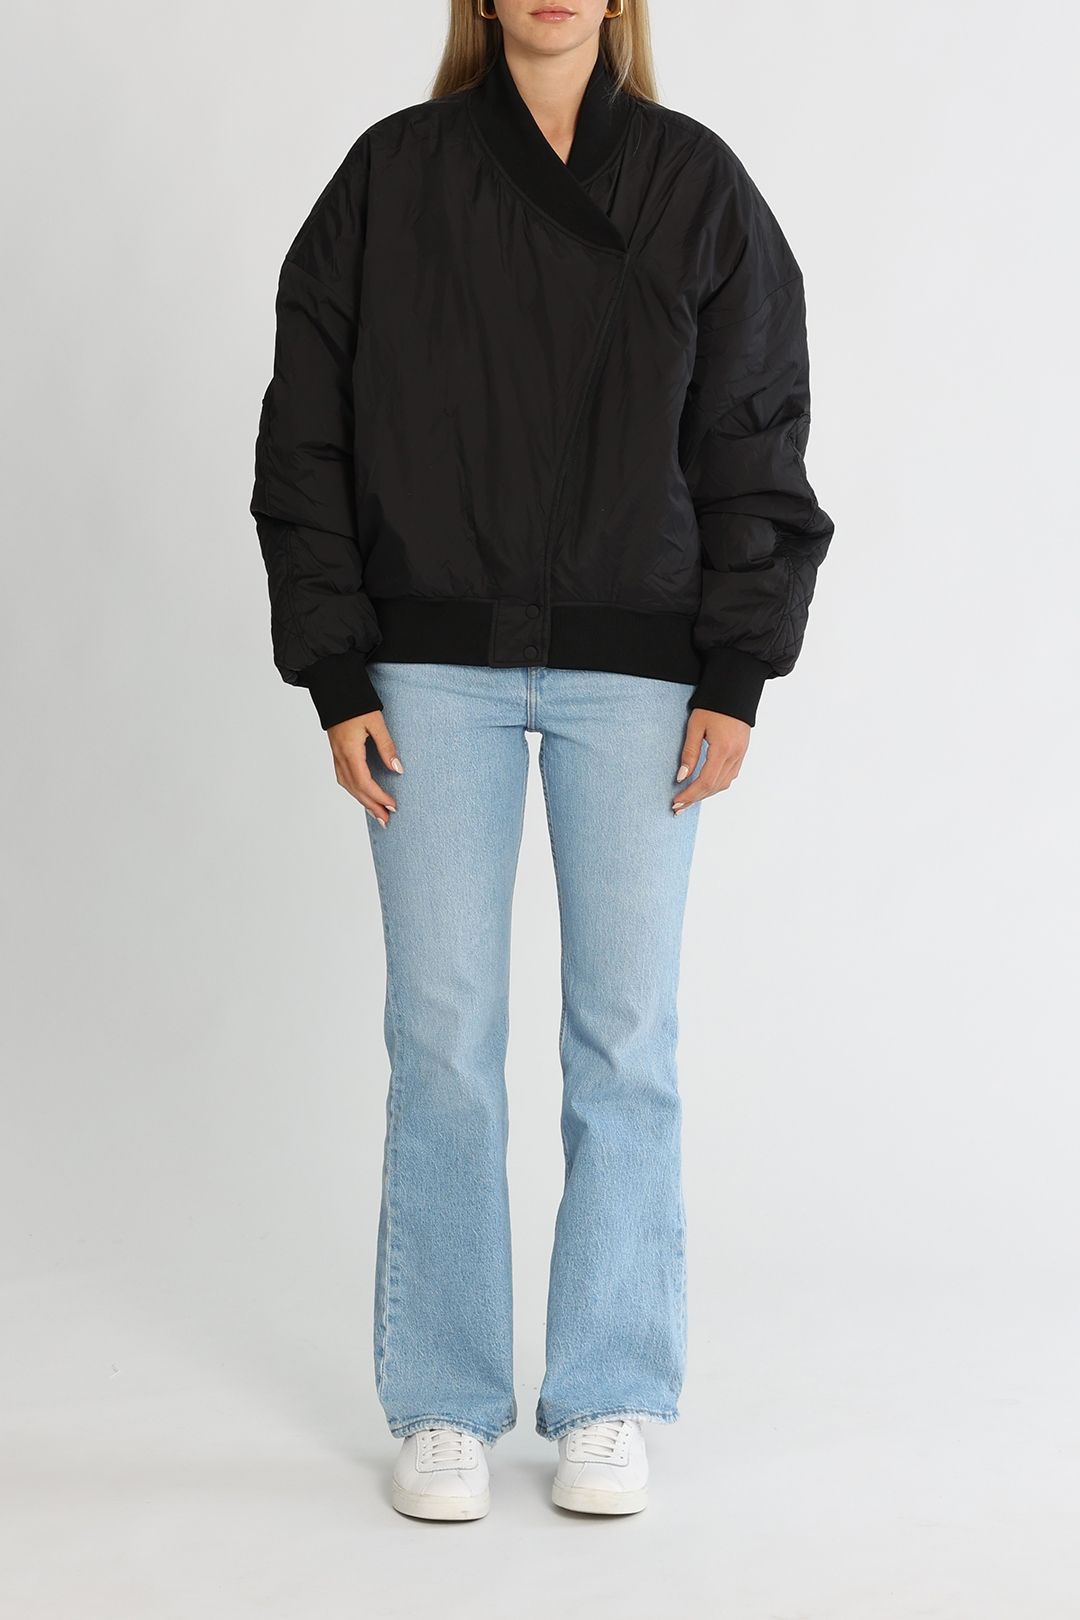 C&M Camilla and Marc Baltimore Padded Jacket Black Balloon Sleeves